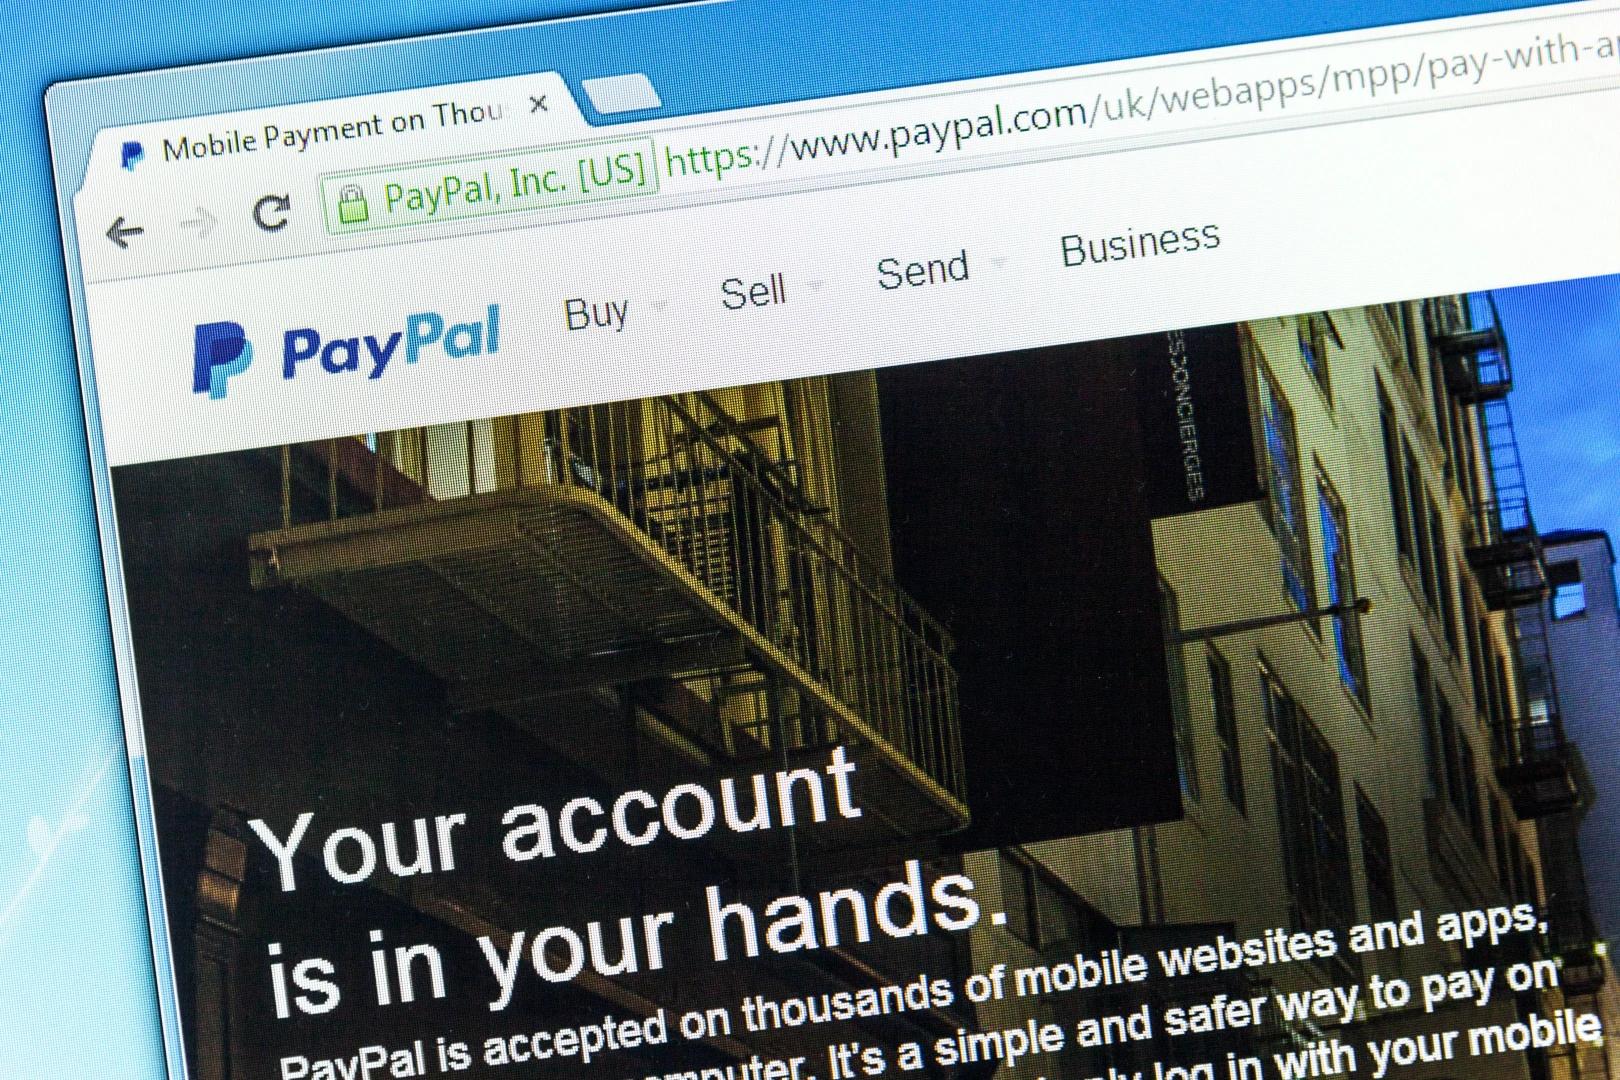 Updated PayPal policy fines users $2,500 for unapproved speech